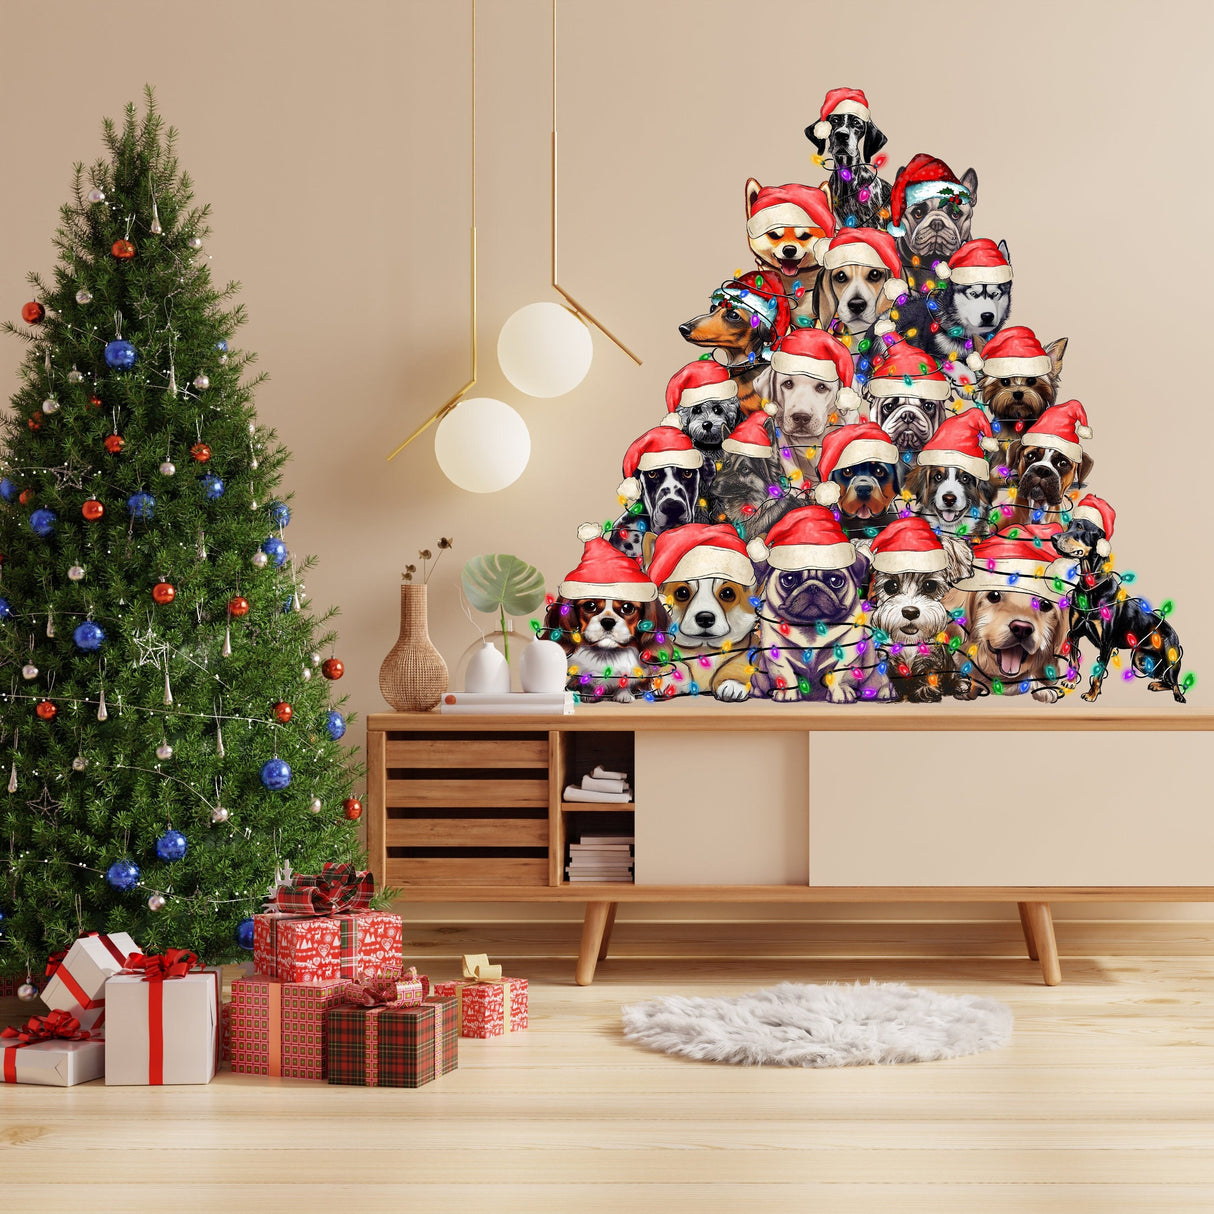 Canine Christmas Tree Wall Sticker - Whimsical Dog Themed Wall Decals for Holidays